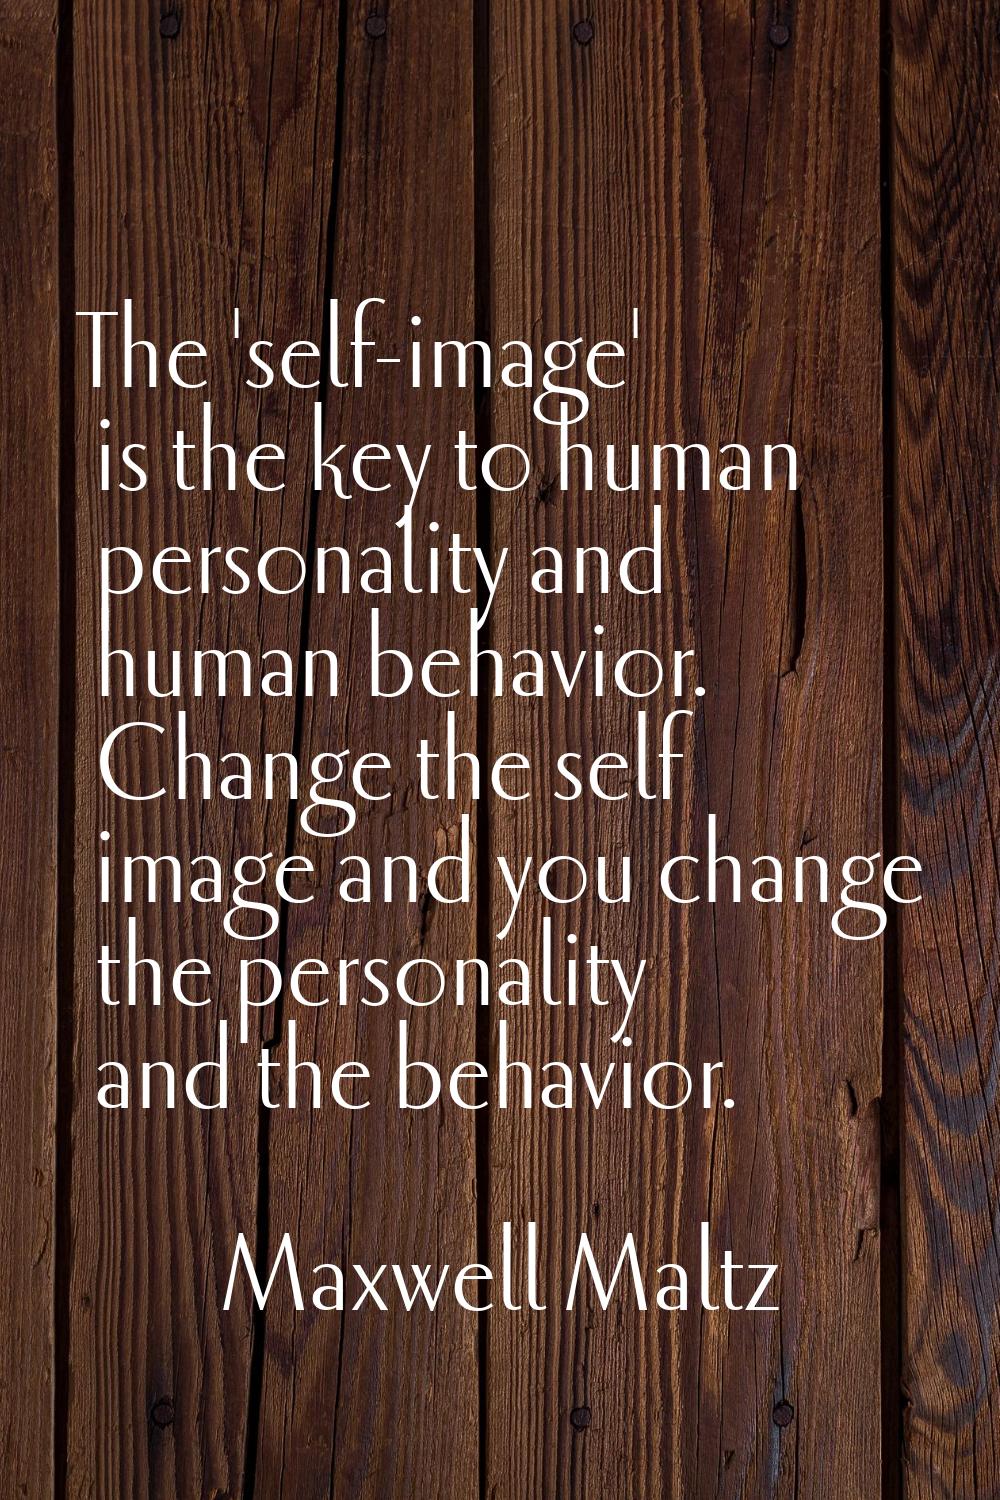 The 'self-image' is the key to human personality and human behavior. Change the self image and you 